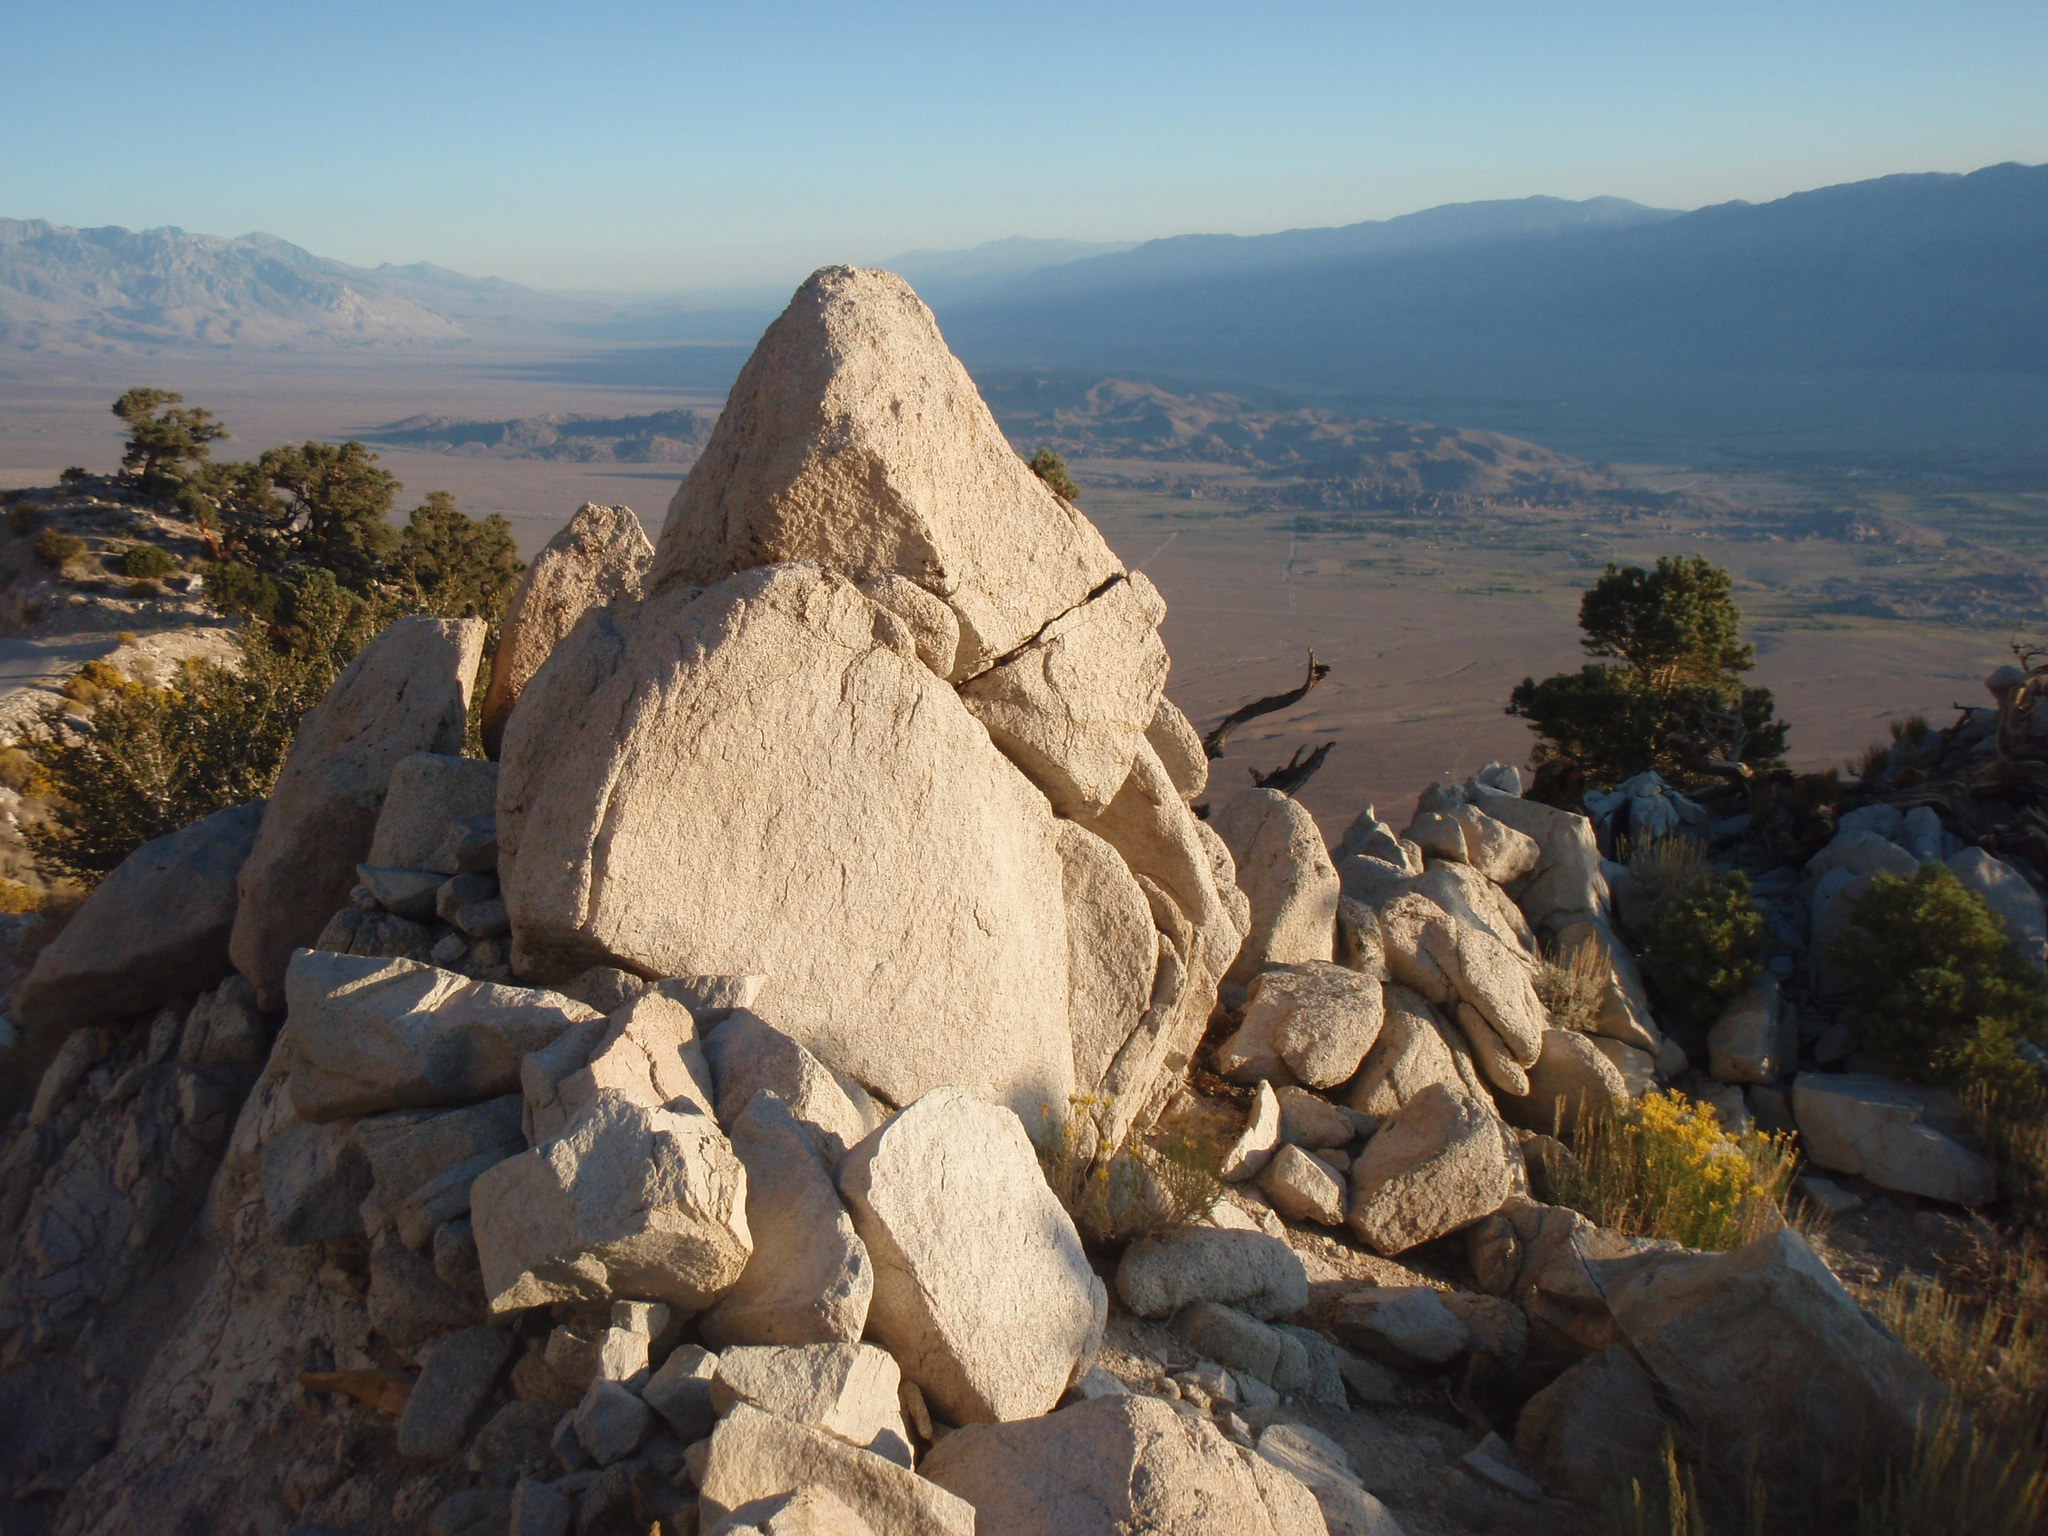 High Sierra and Owens Valley above Lone Pine